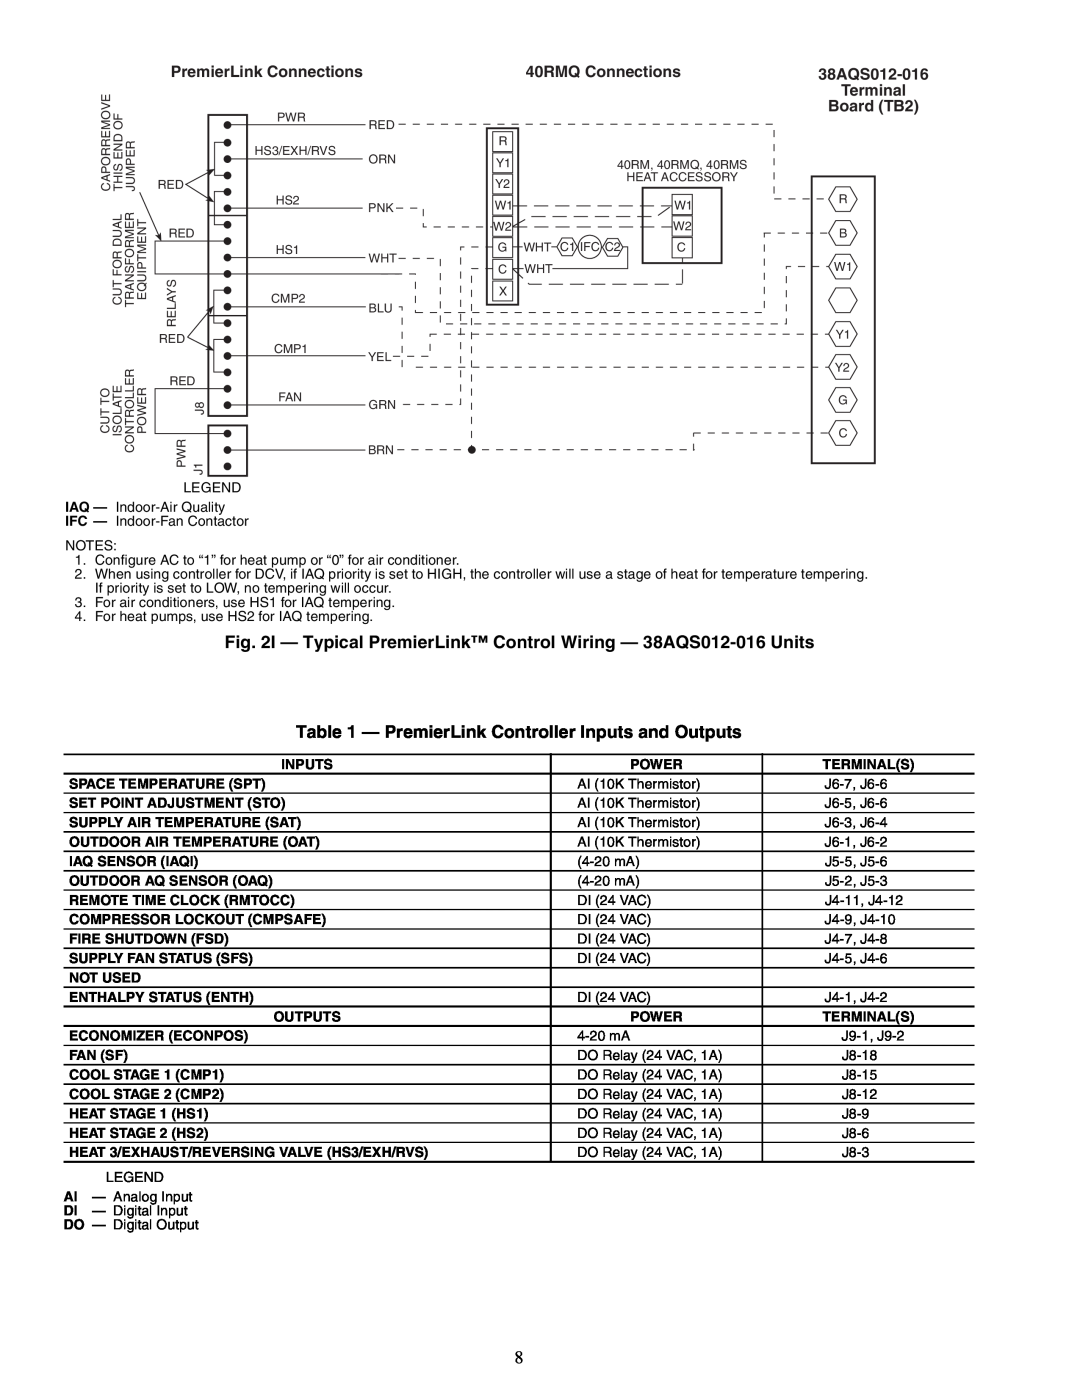 Carrier 33CSPREMLK specifications PremierLink Connections, 40RMQ Connections, 38AQS012-016 Terminal Board TB2 